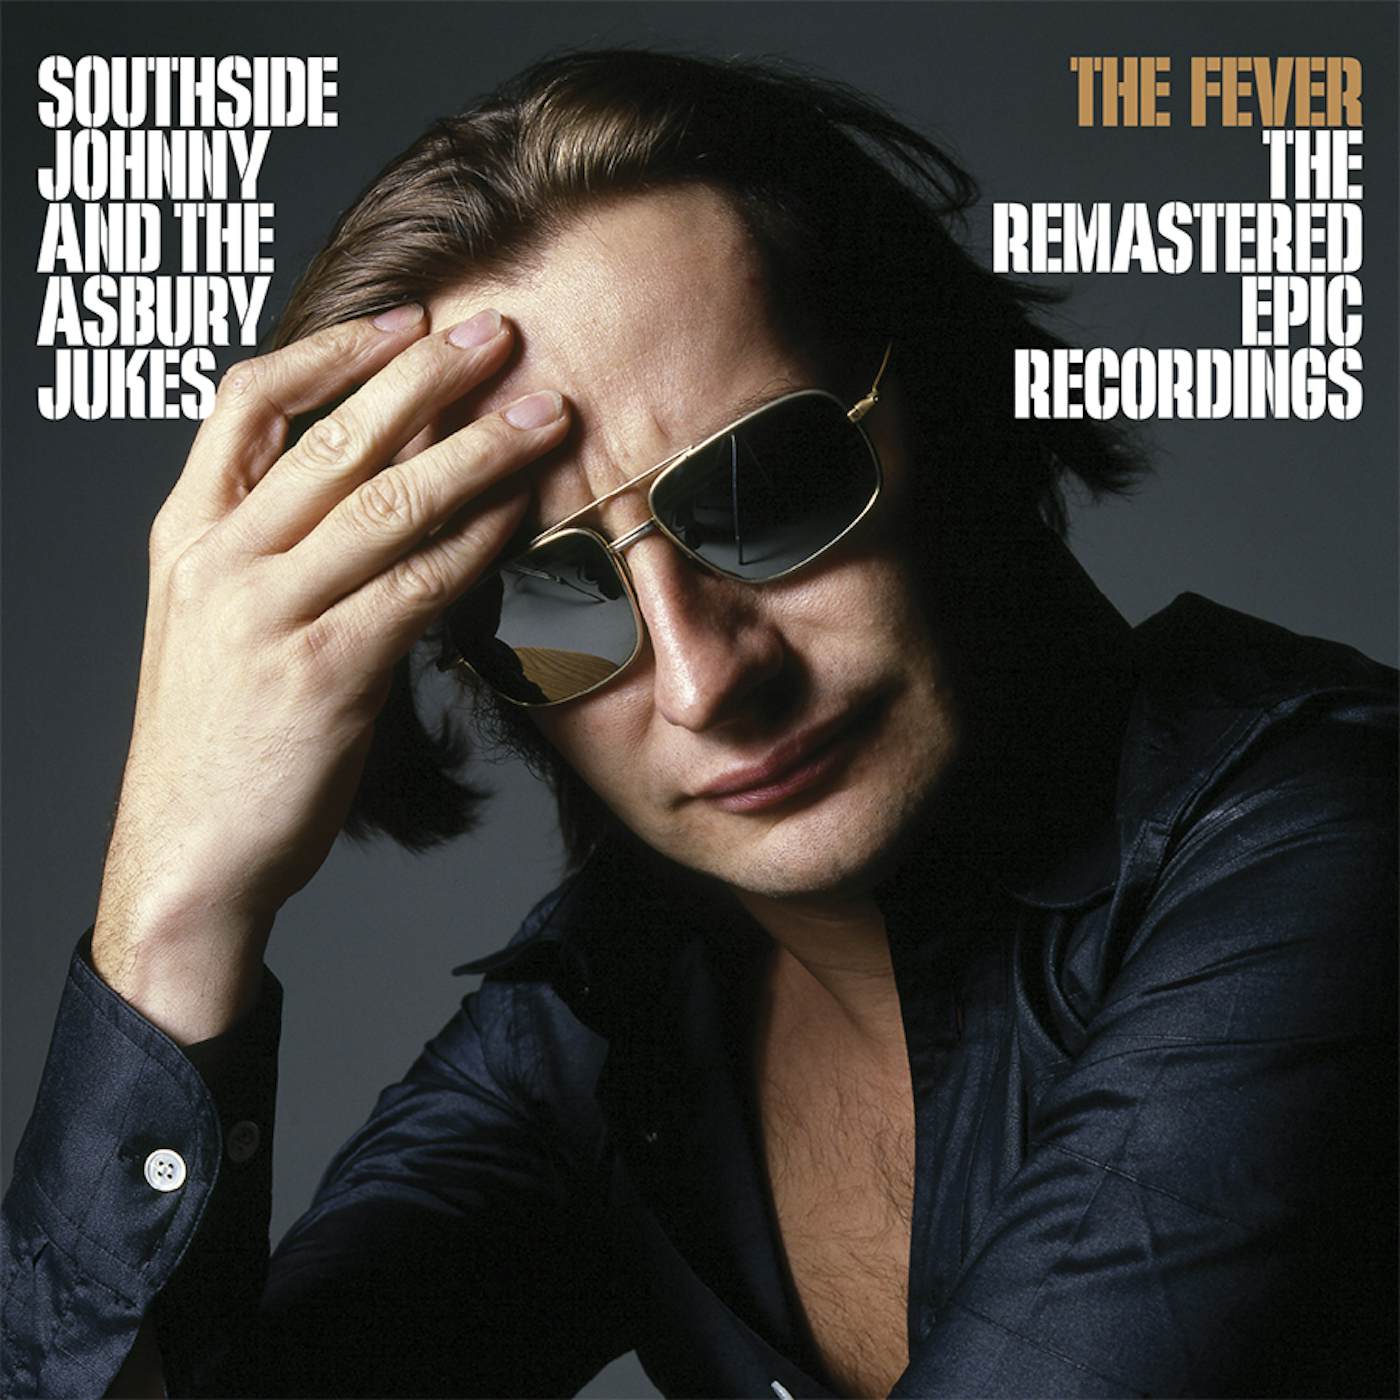 Southside Johnny And The Asbury Jukes Fever: The Remastered Epic Recordings CD